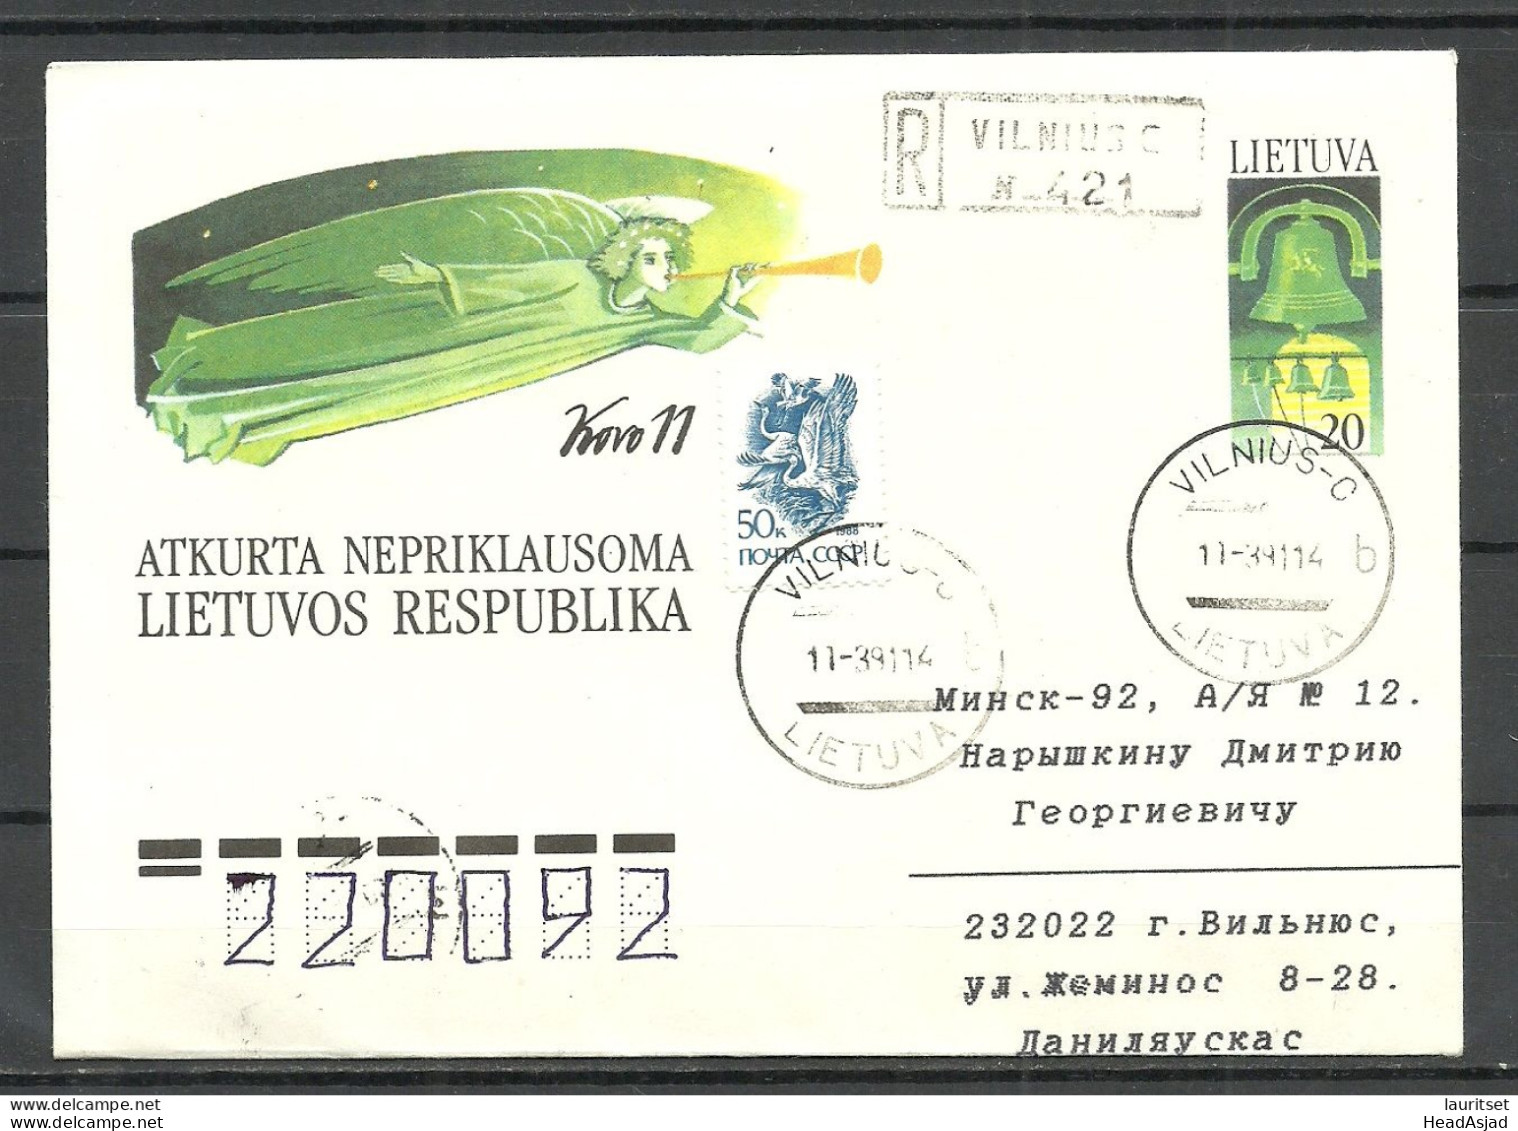 LITHUANIA Litauen 1991 Registered Uprated Postal Stationery Cover Ganzsache O Vilnius To Belarus Mixed Franking - Lituanie